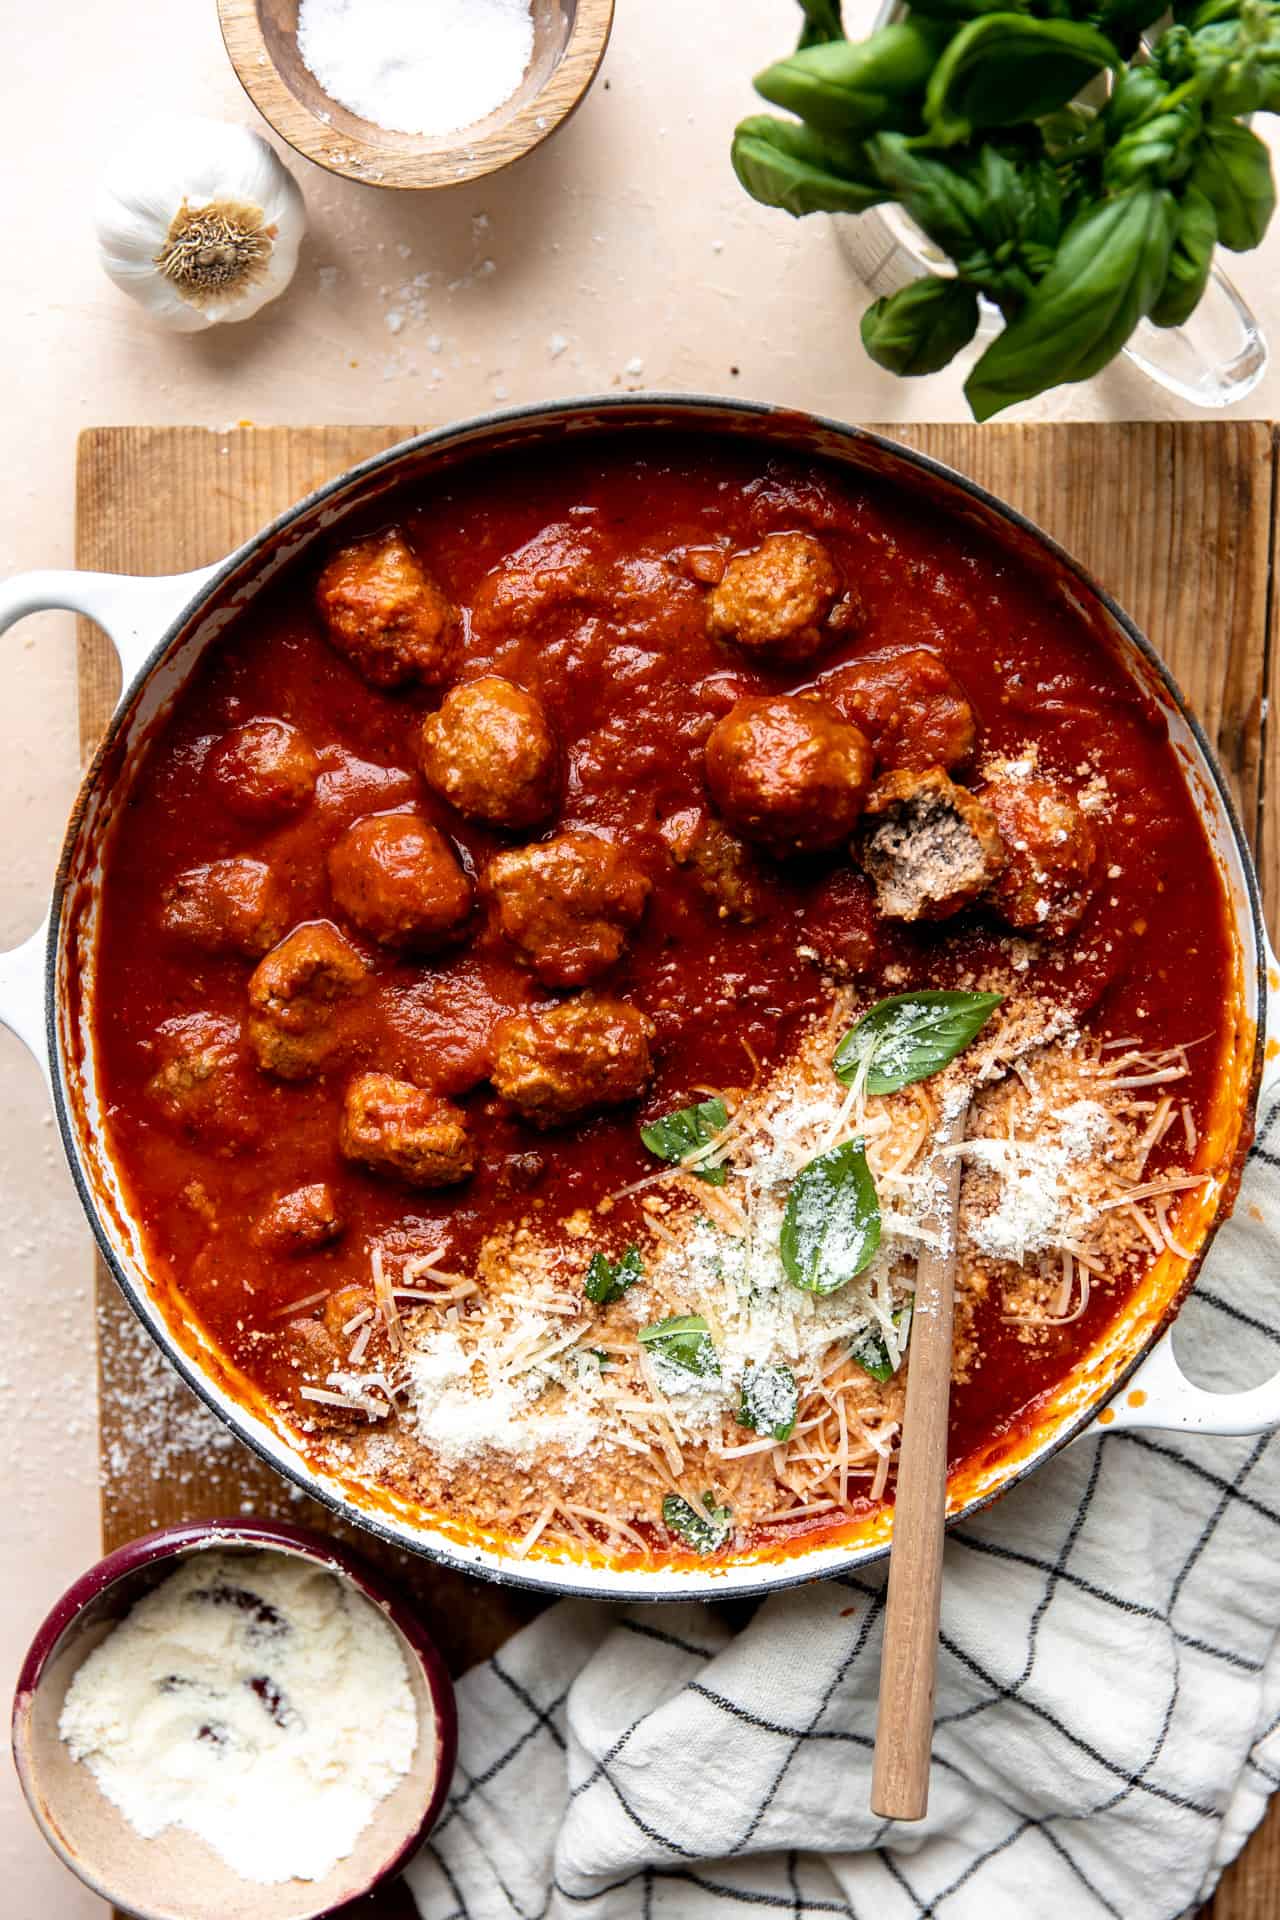 Overhead view of a skillet filled with cooked meatballs in sauce.